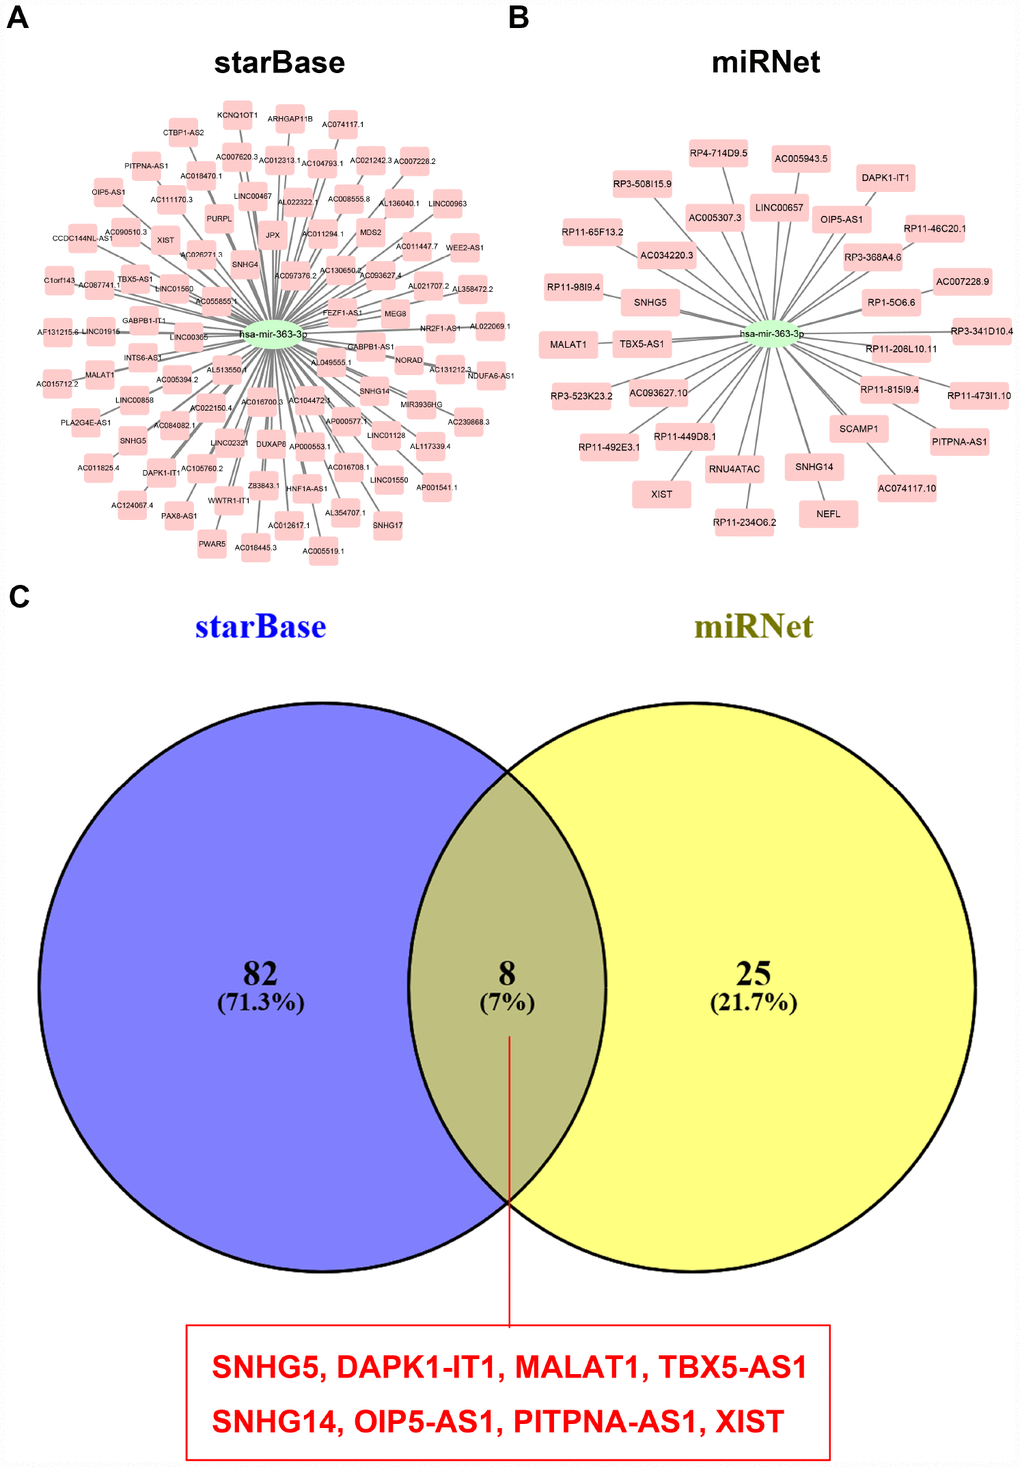 Screening upstream potential lncRNAs of hsa-miR-363-3p. (A) The potential lncRNAs of hsa-miR-363-3p predicted by starBase database. (B) The potential lncRNAs of hsa-miR-363-3p predicted by miRNet database. (C) 8 intersected lncRNAs (SNHG5, DAPK1-IT1, MALAT1, TBX5-AS1, SNHG14, OIP5-AS1, PITPNA-AS1 and XIST) from starBase and miRNet databases.